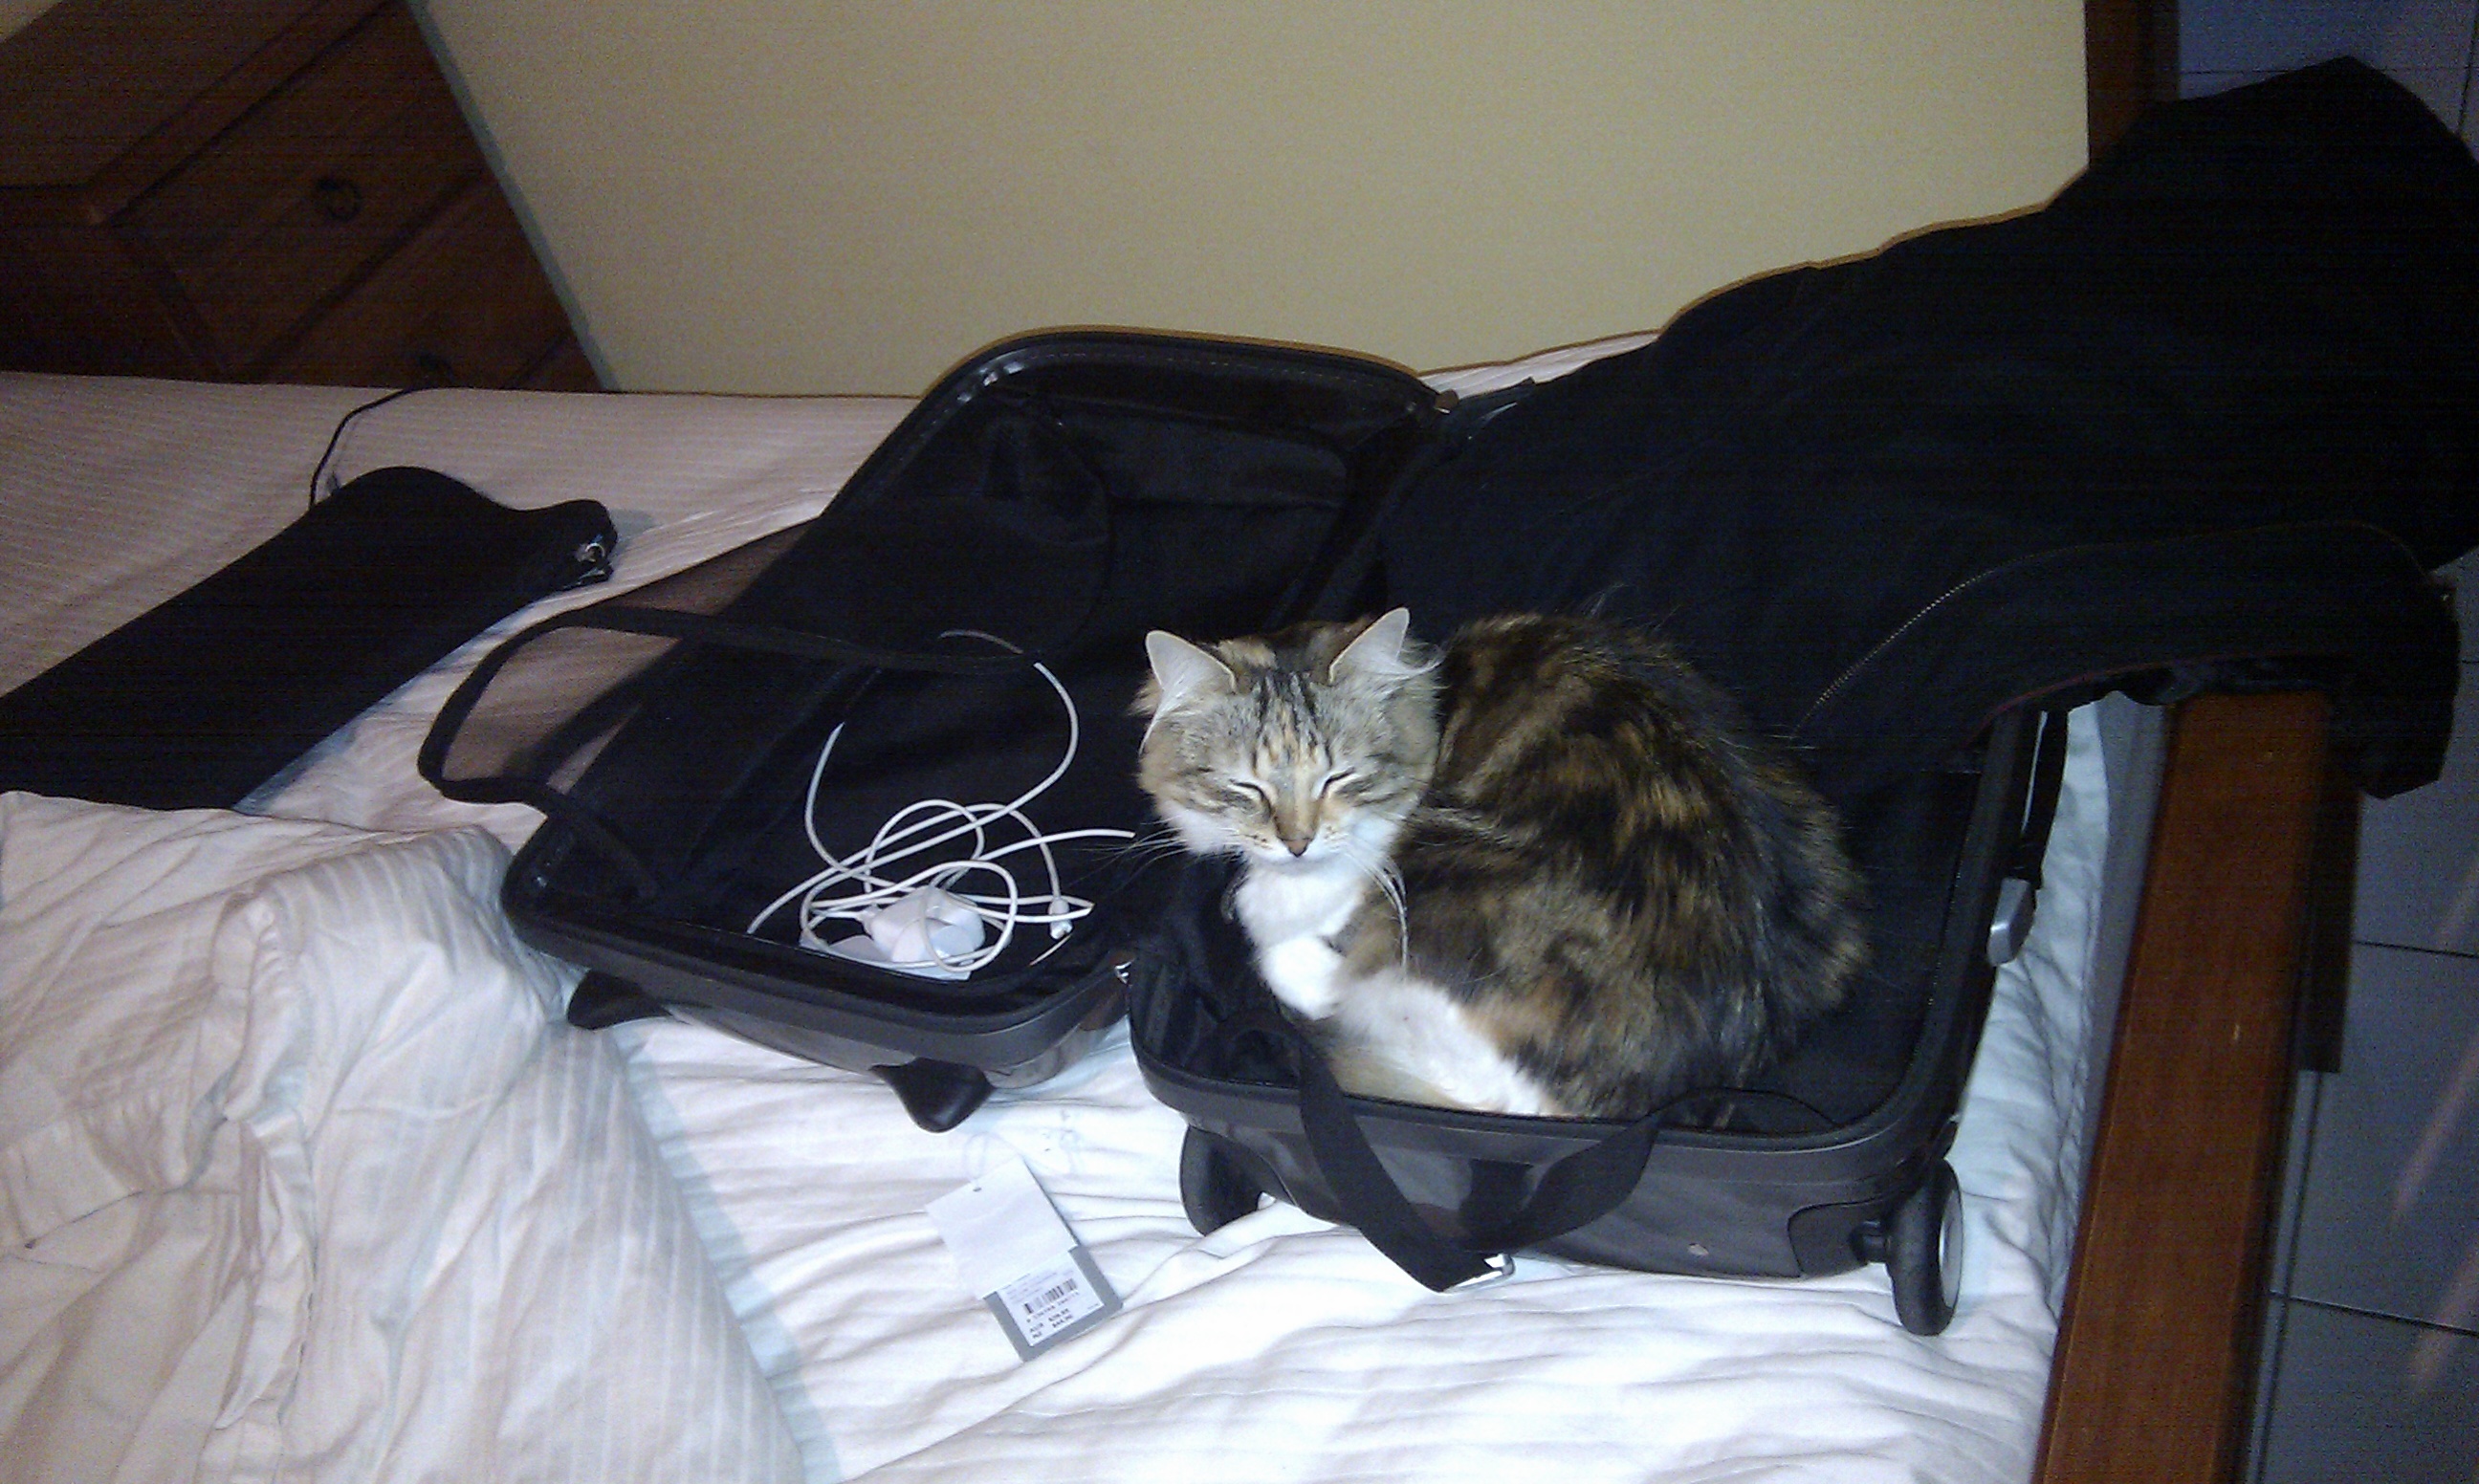 Sybil wants to come